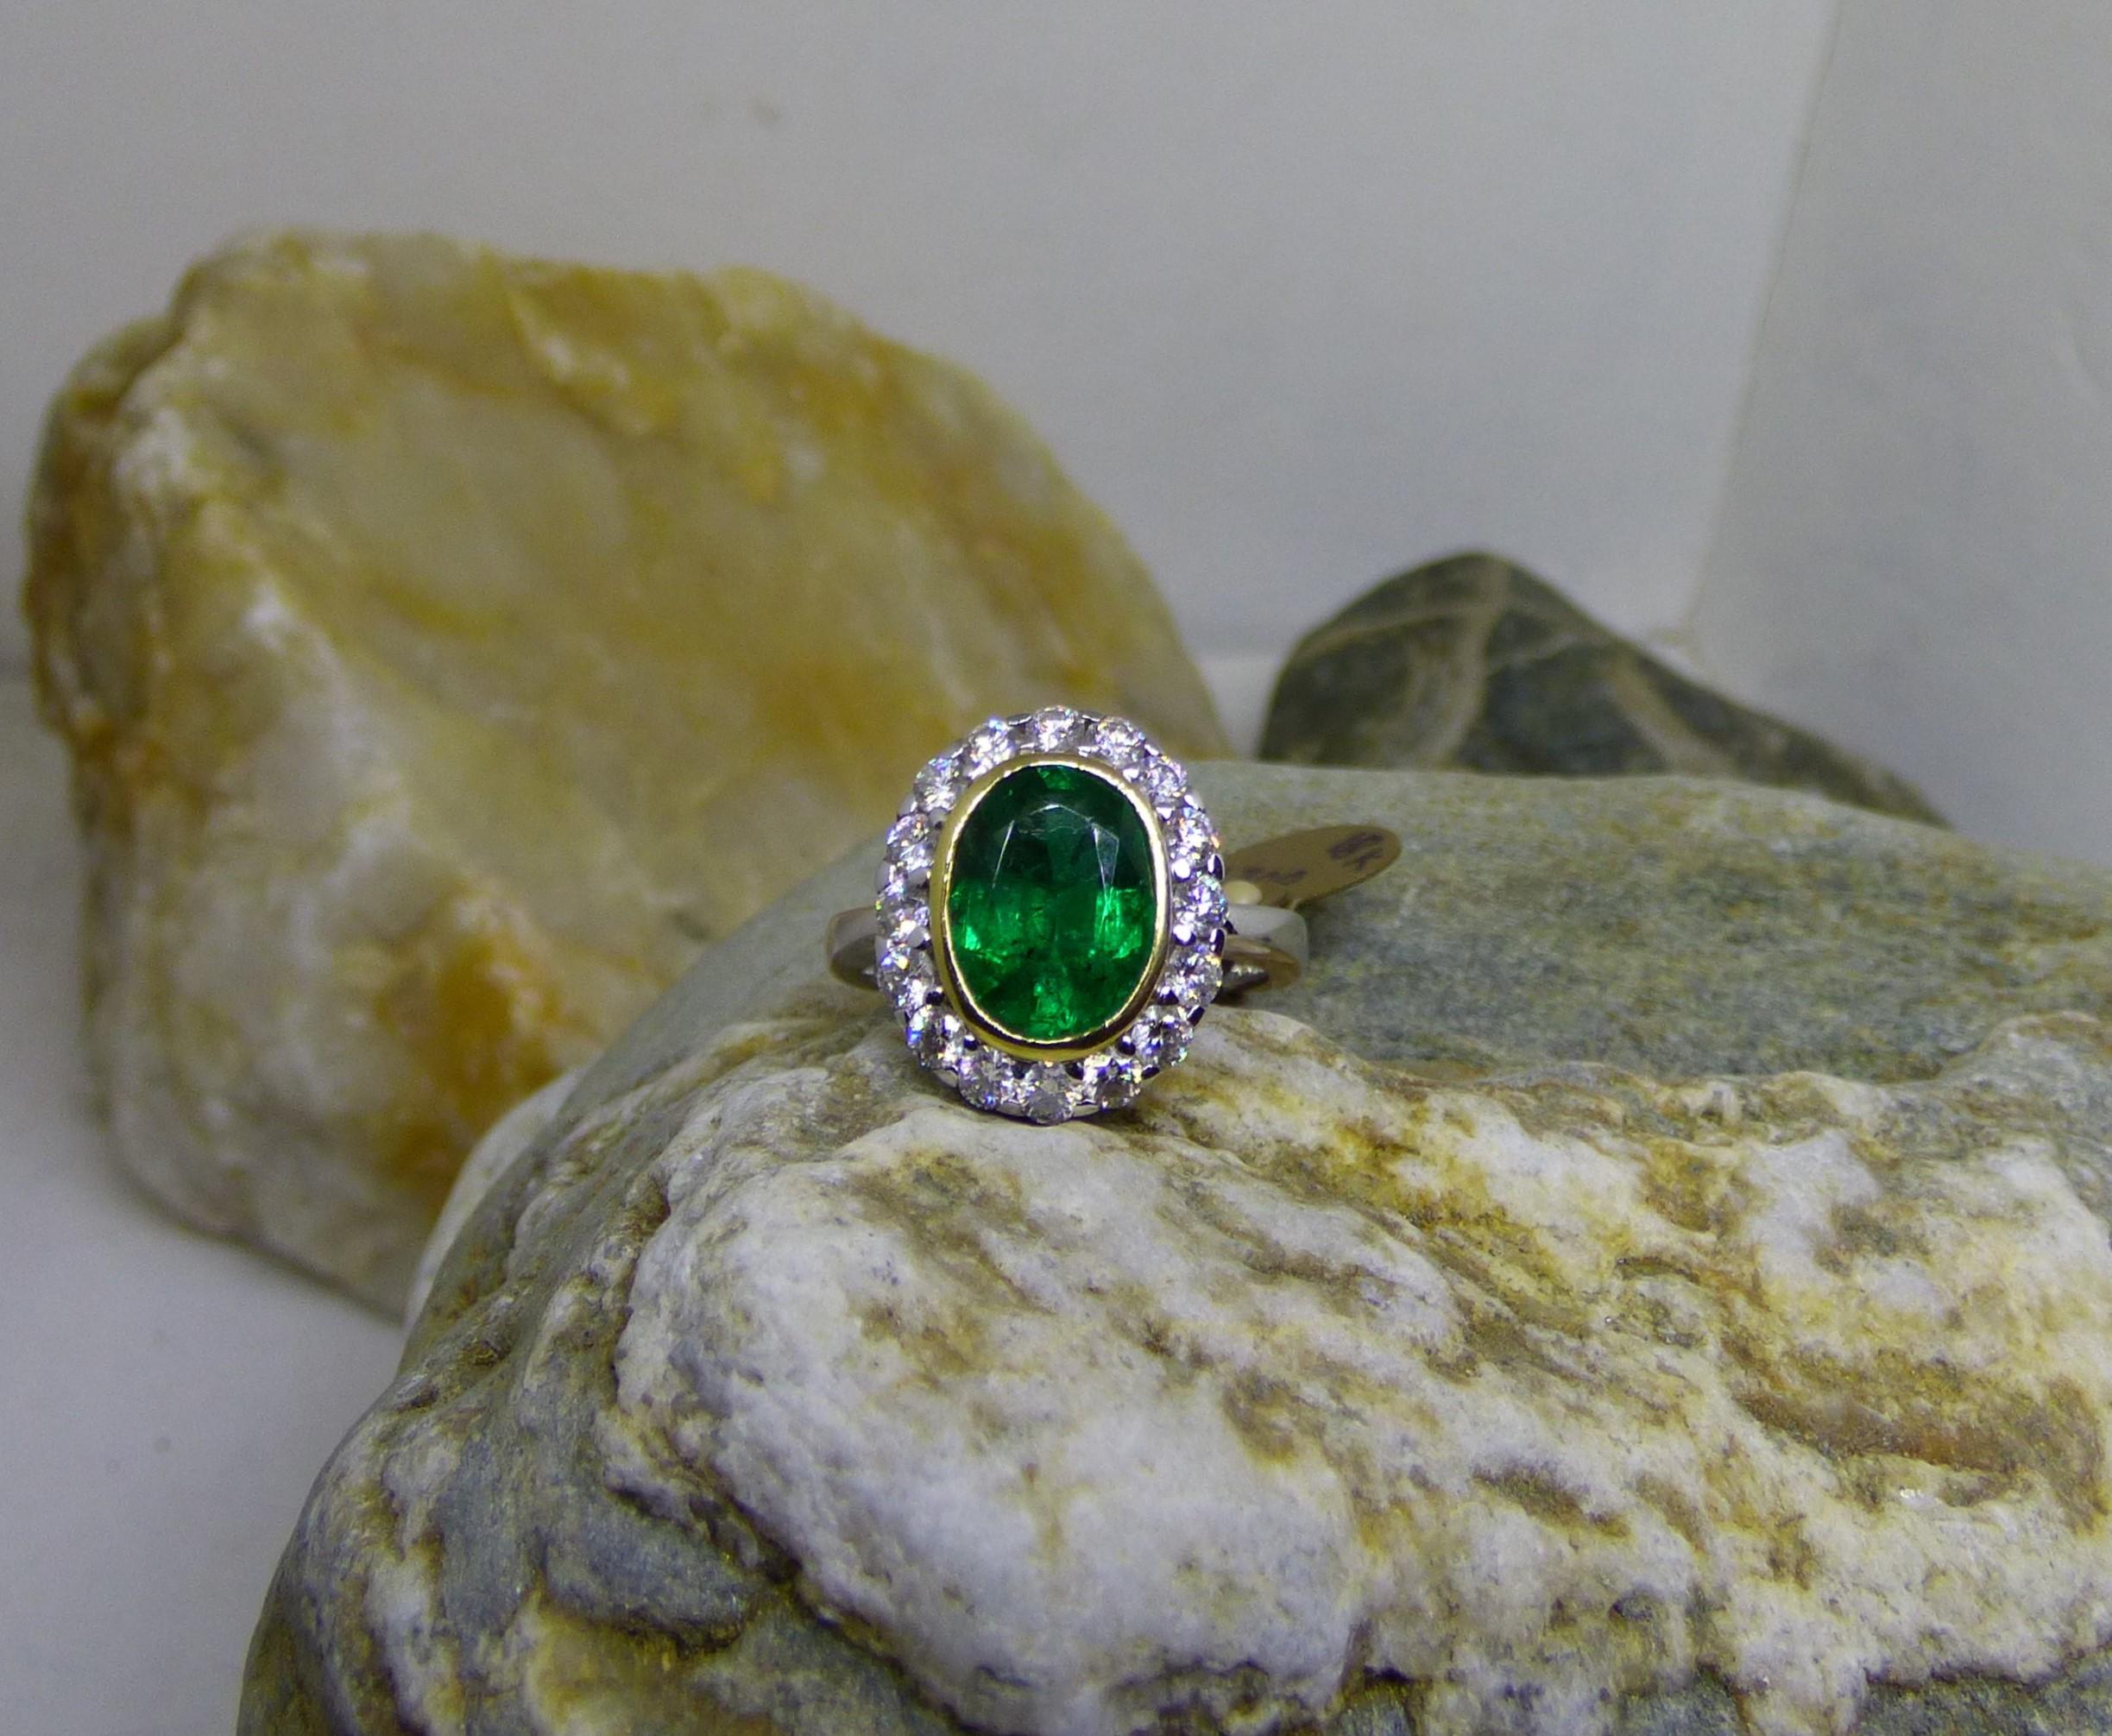 A bright and colourful 2.37ct Oval Emerald is the centre point of this ring. The 10X8mm Emerald is surrounded by 16 Diamonds with a total Diamond weight of .86ct.  The total size of the front of the ring is 15X11mm.  The ring is handmade in 18K